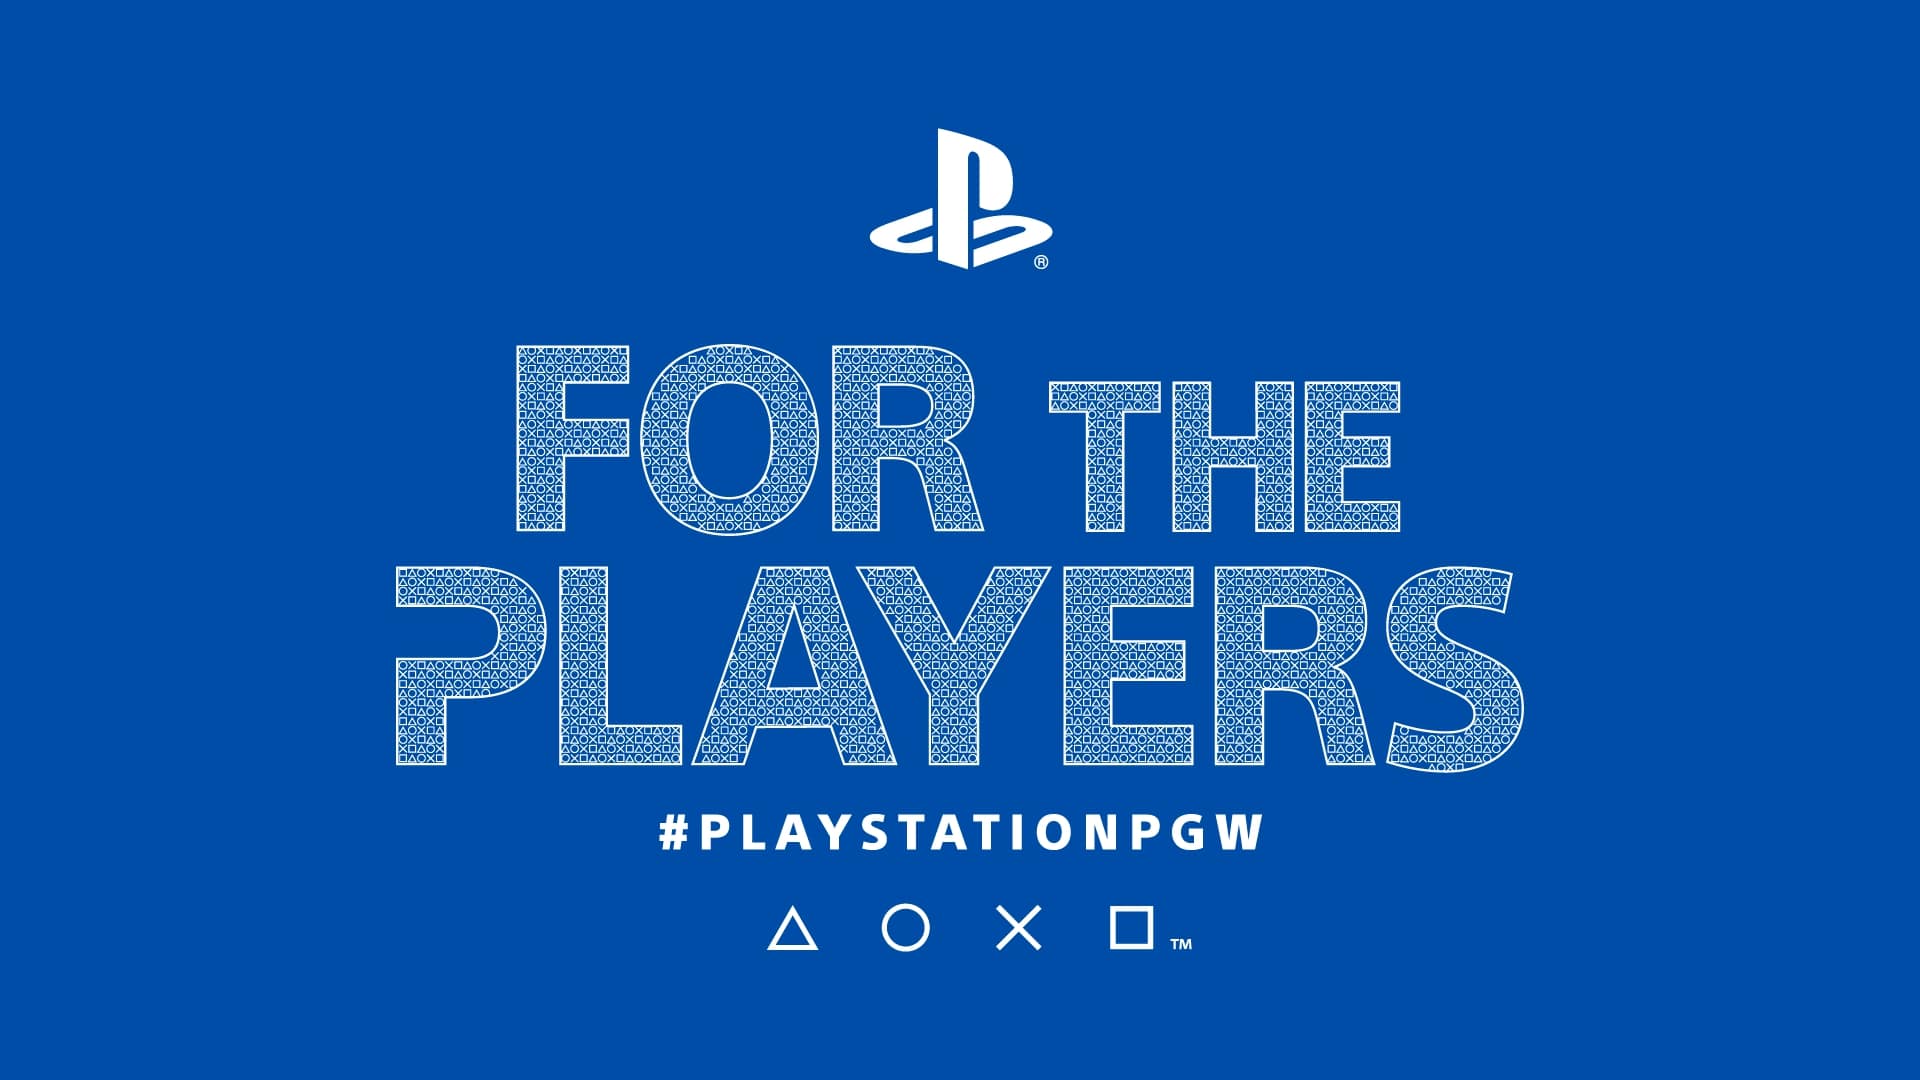 Playstation pgw for the palyers